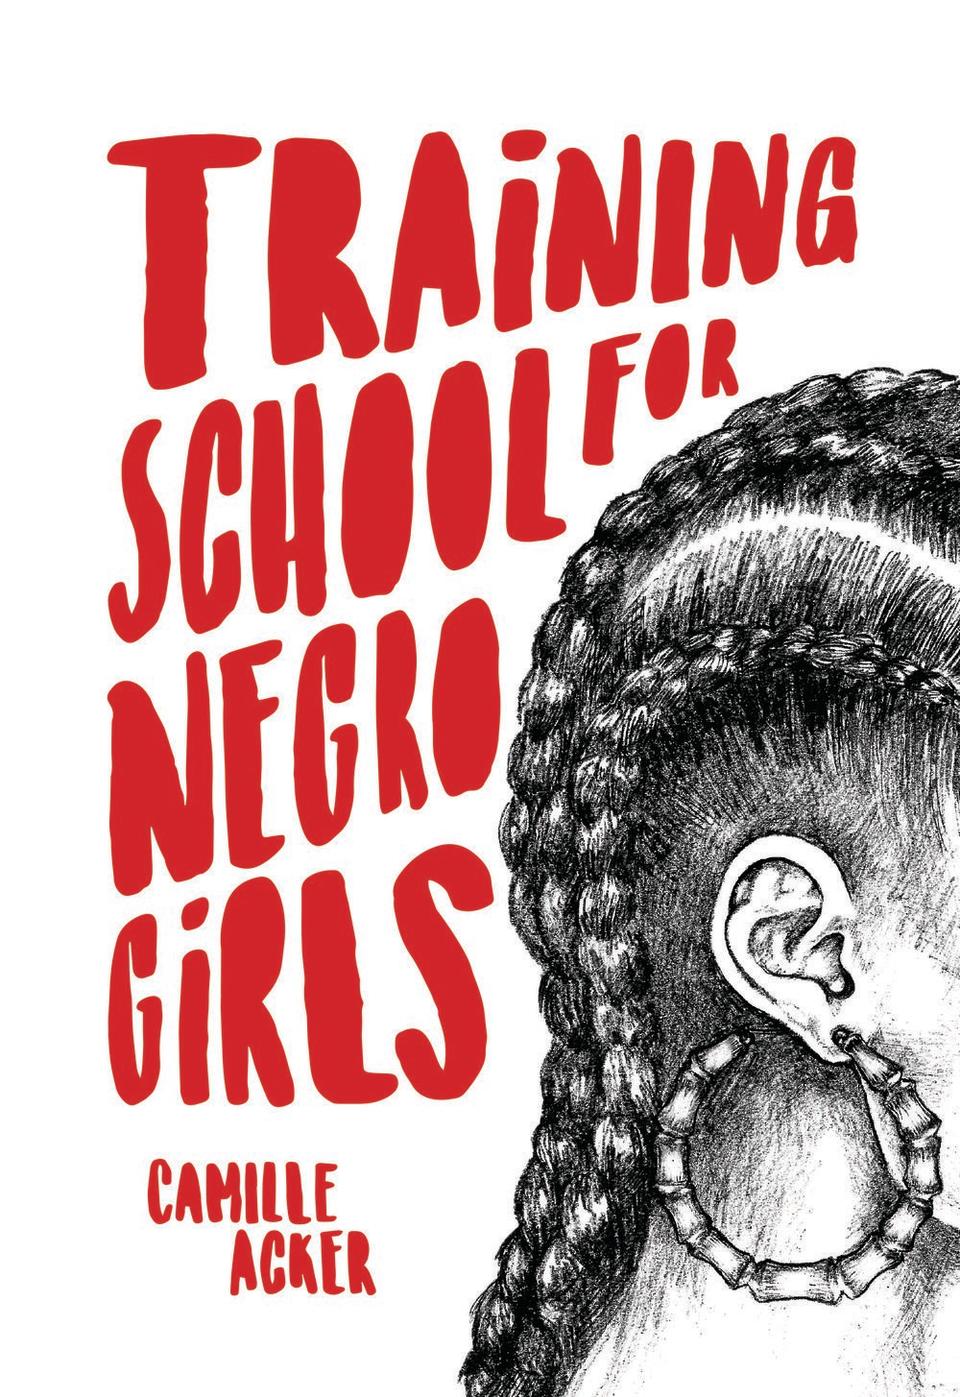 Training School for Negro Girls by Camille Acker